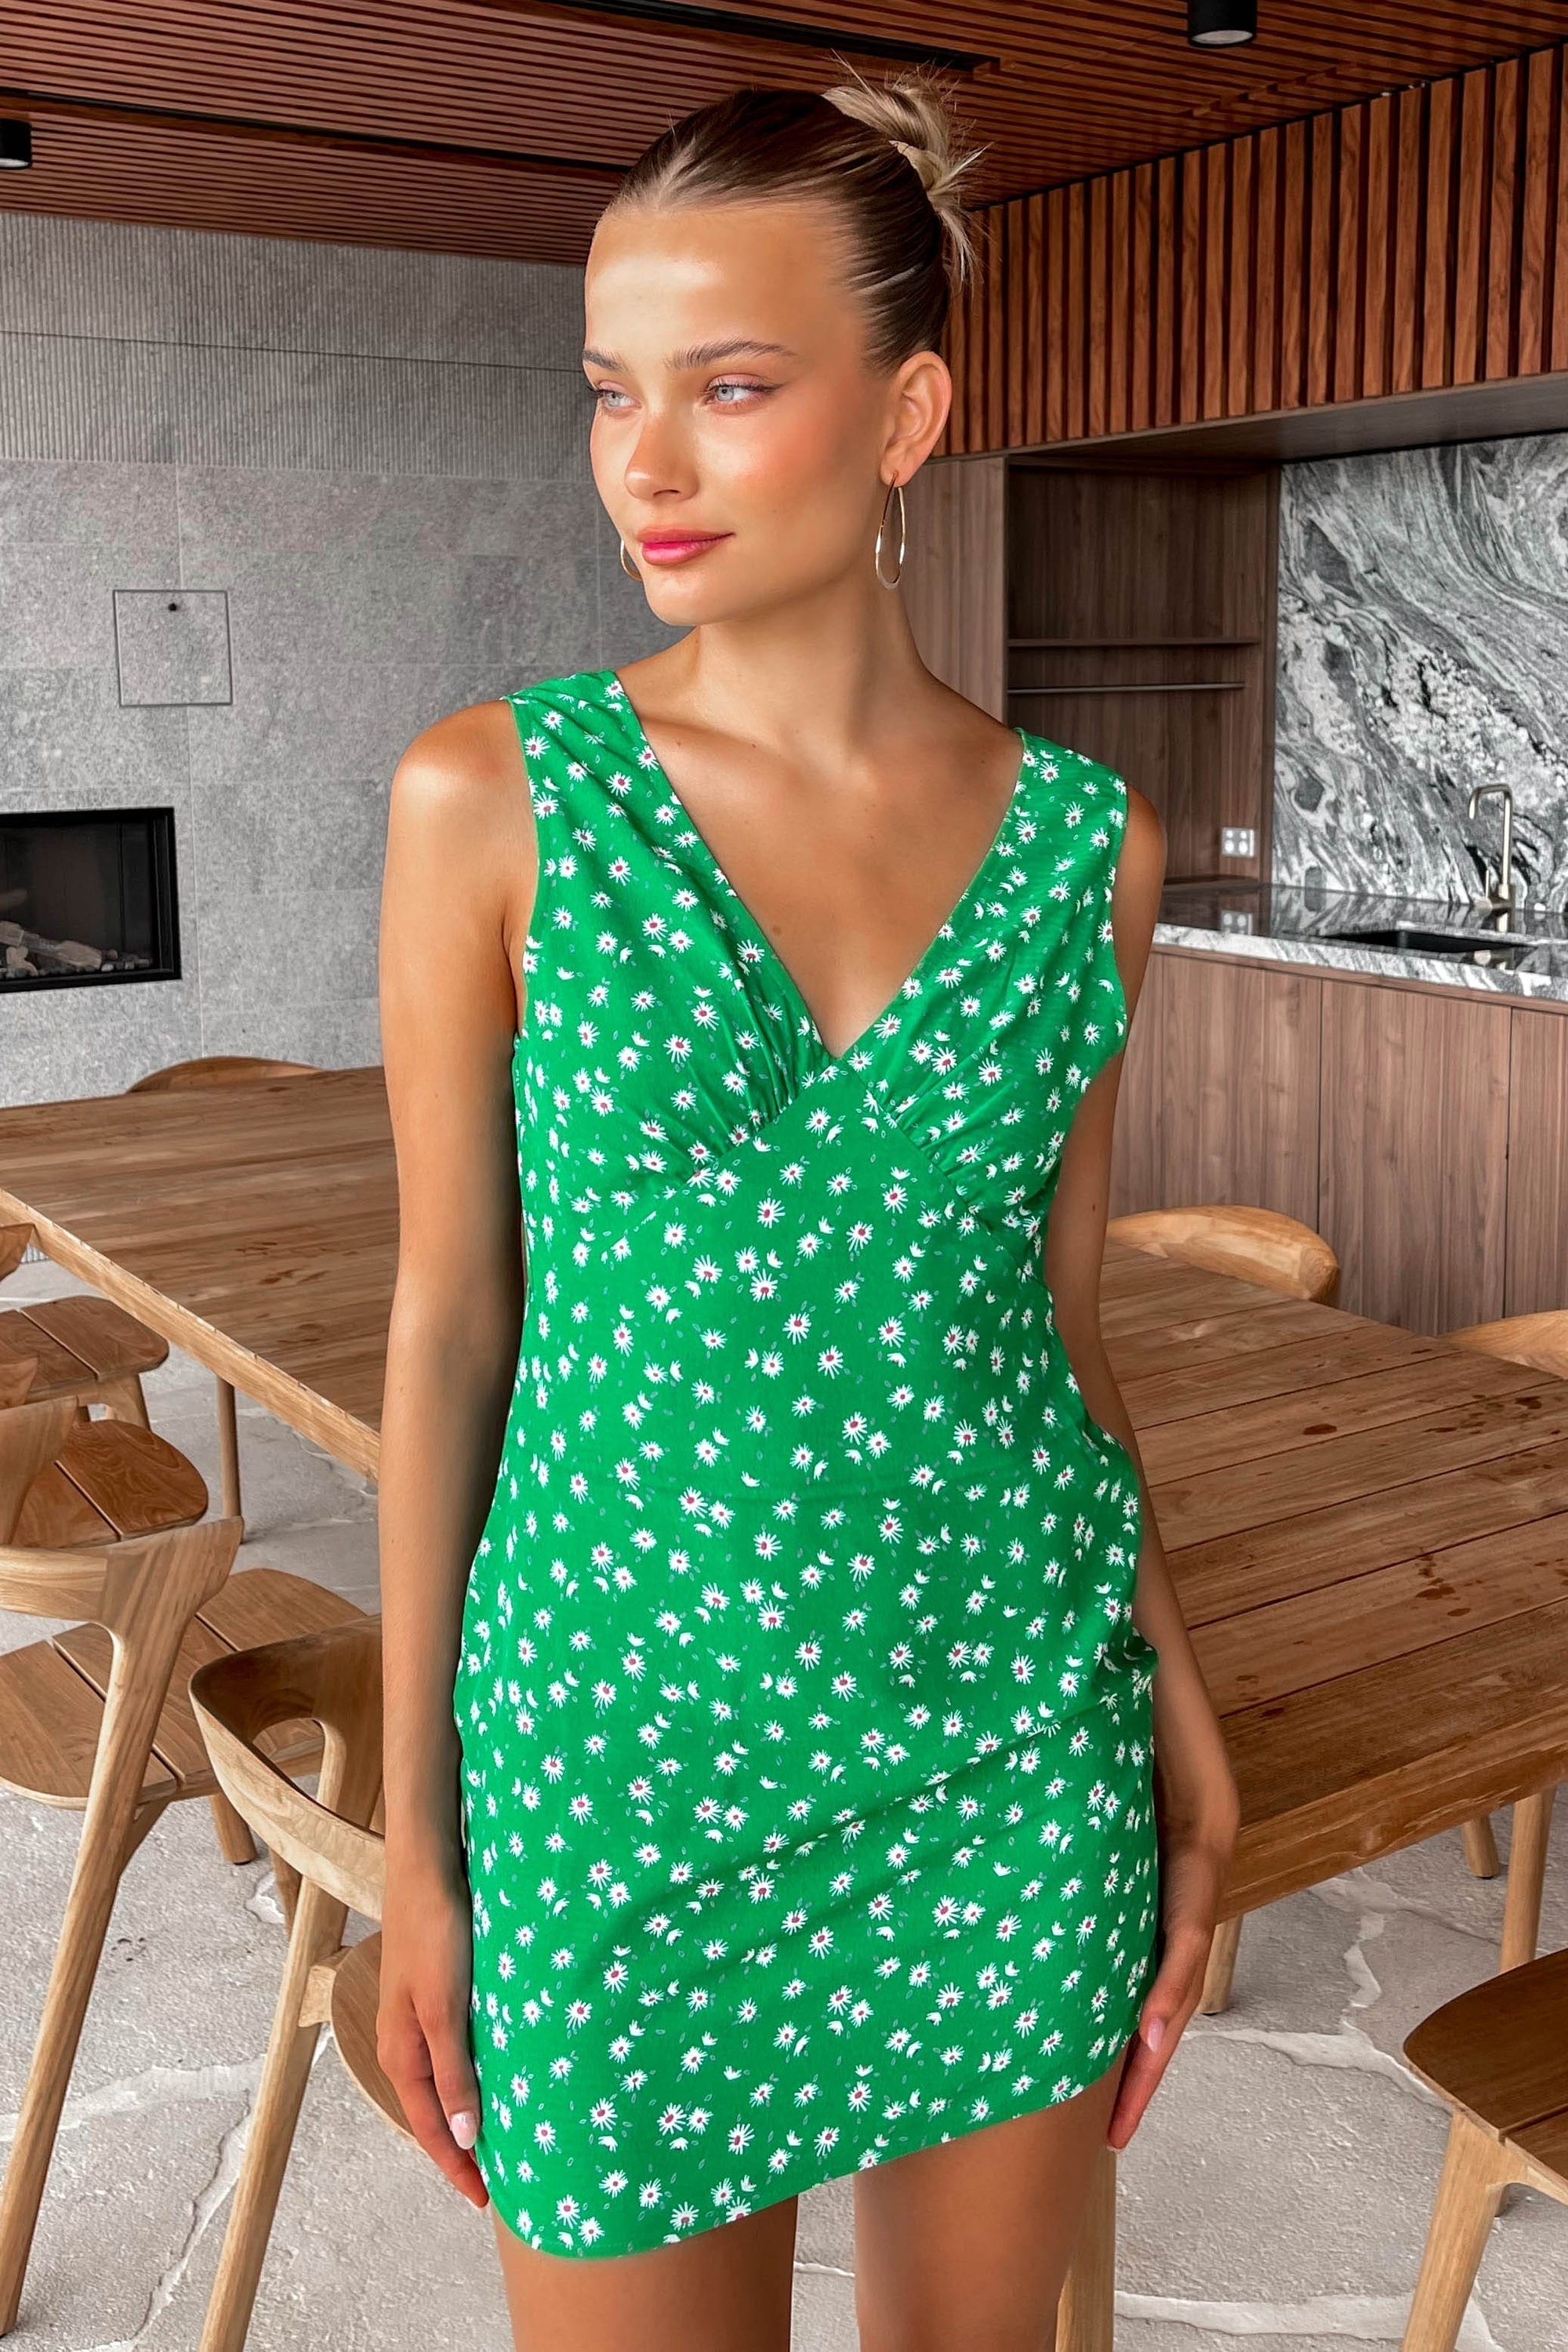 Tiarana Dress, COTTON & POLYESTER, COTTON AND POLYESTER, DRESS, DRESSES, FLORAL, FLORALS, GREEN, MINI DRESS, POLYESTER AND COTTON, , -MISHKAH